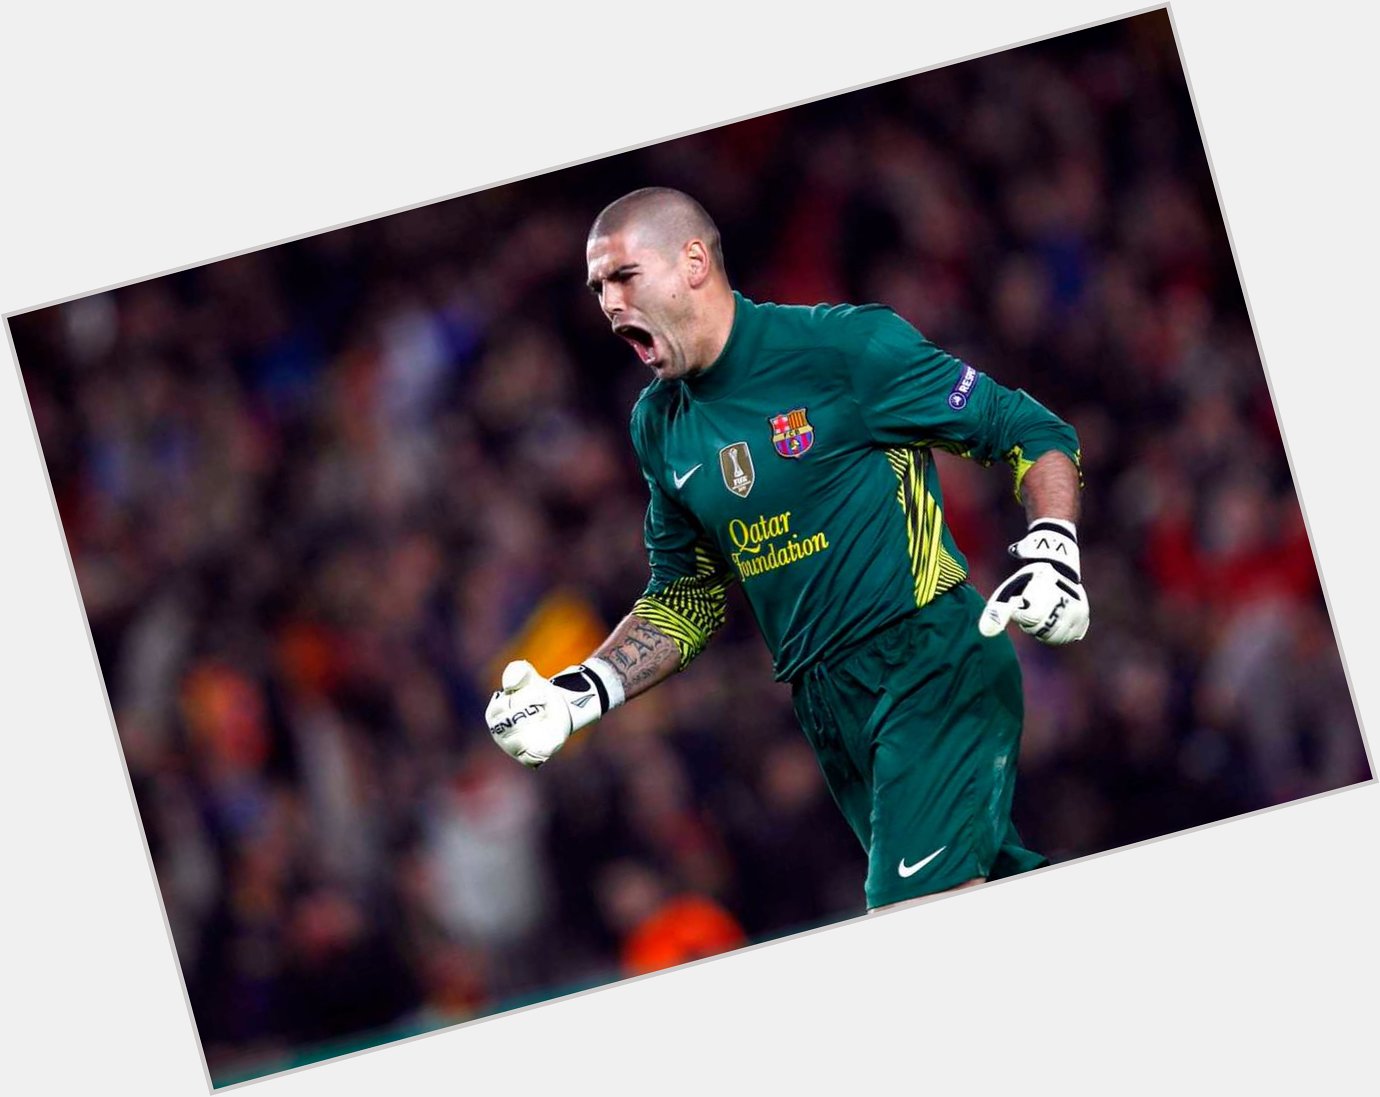 A late happy birthday to one of Barça\s biggest icons. Victor Valdes turned 37 today. 